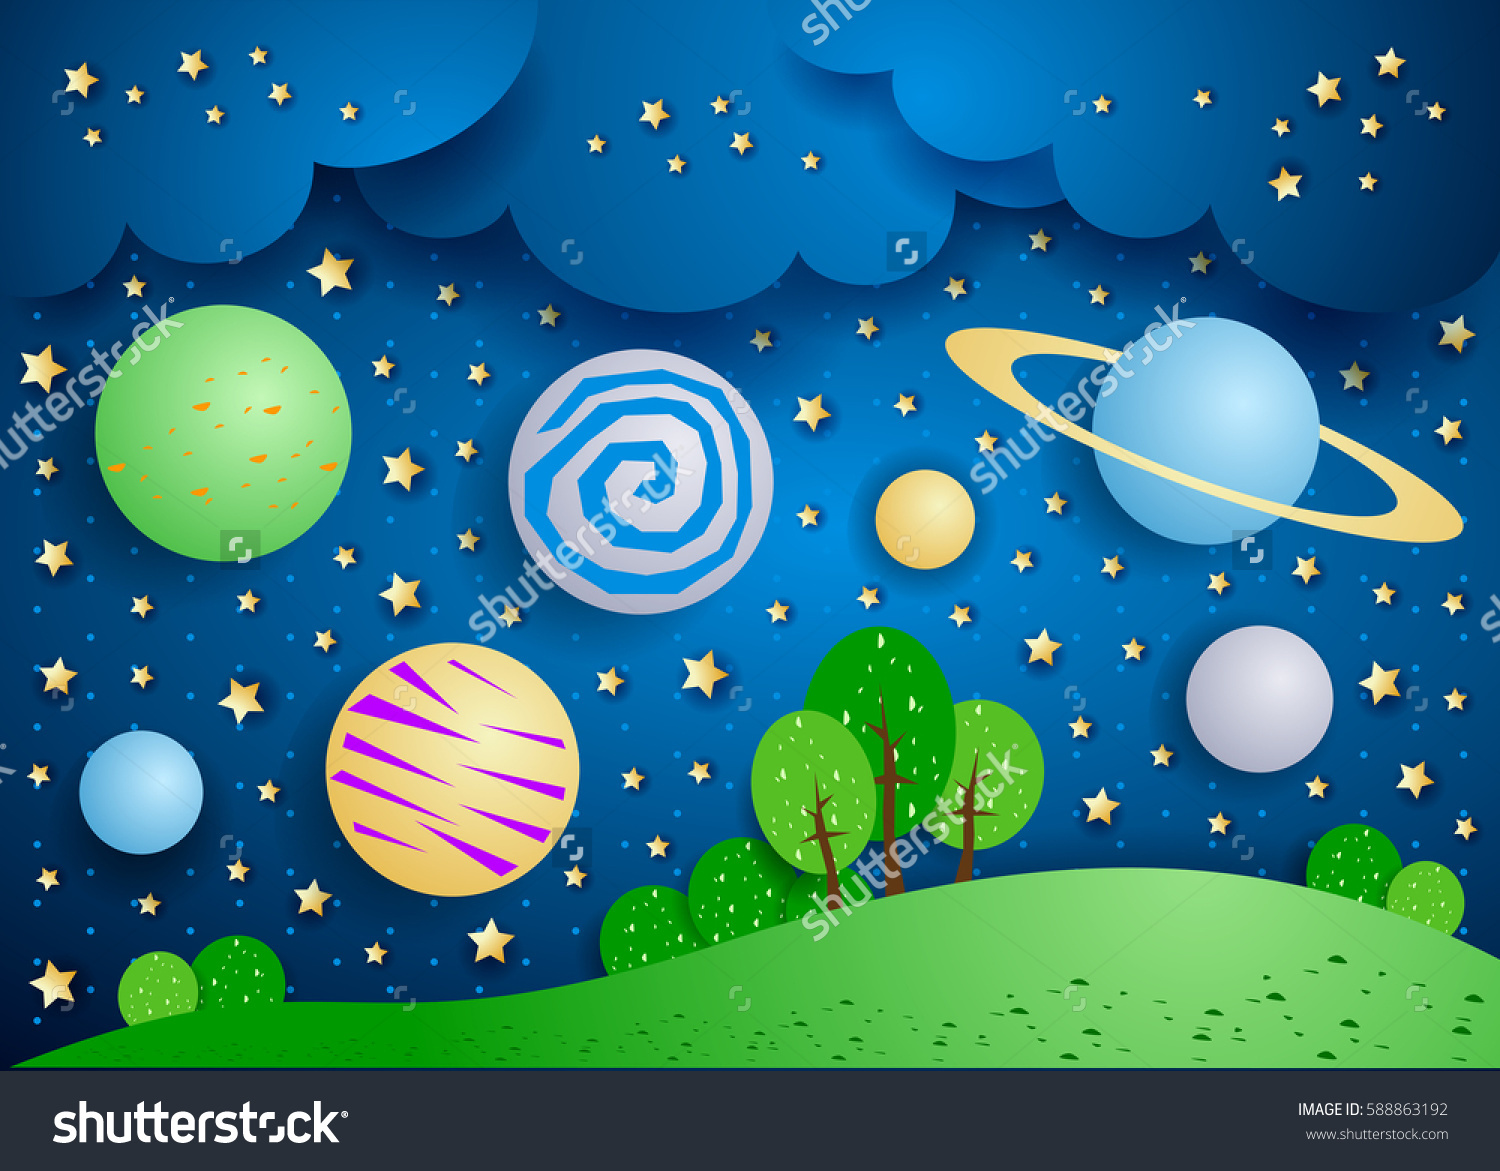 Surreal Planet Sky clipart #1, Download drawings